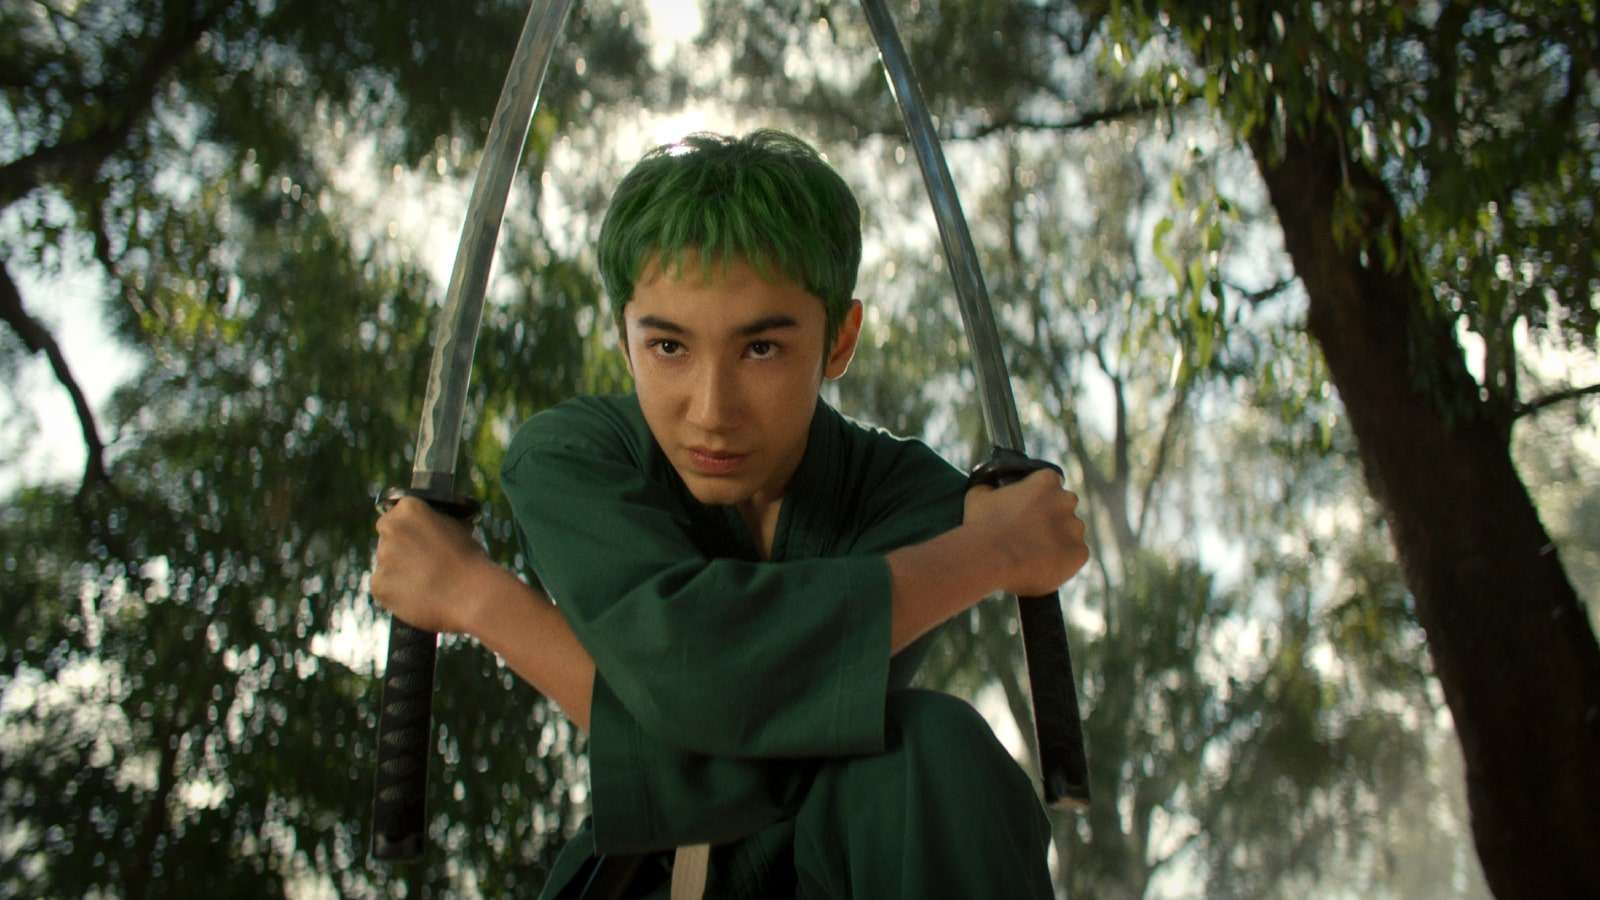 Young Zoro played by Maximilian Lee Piazza